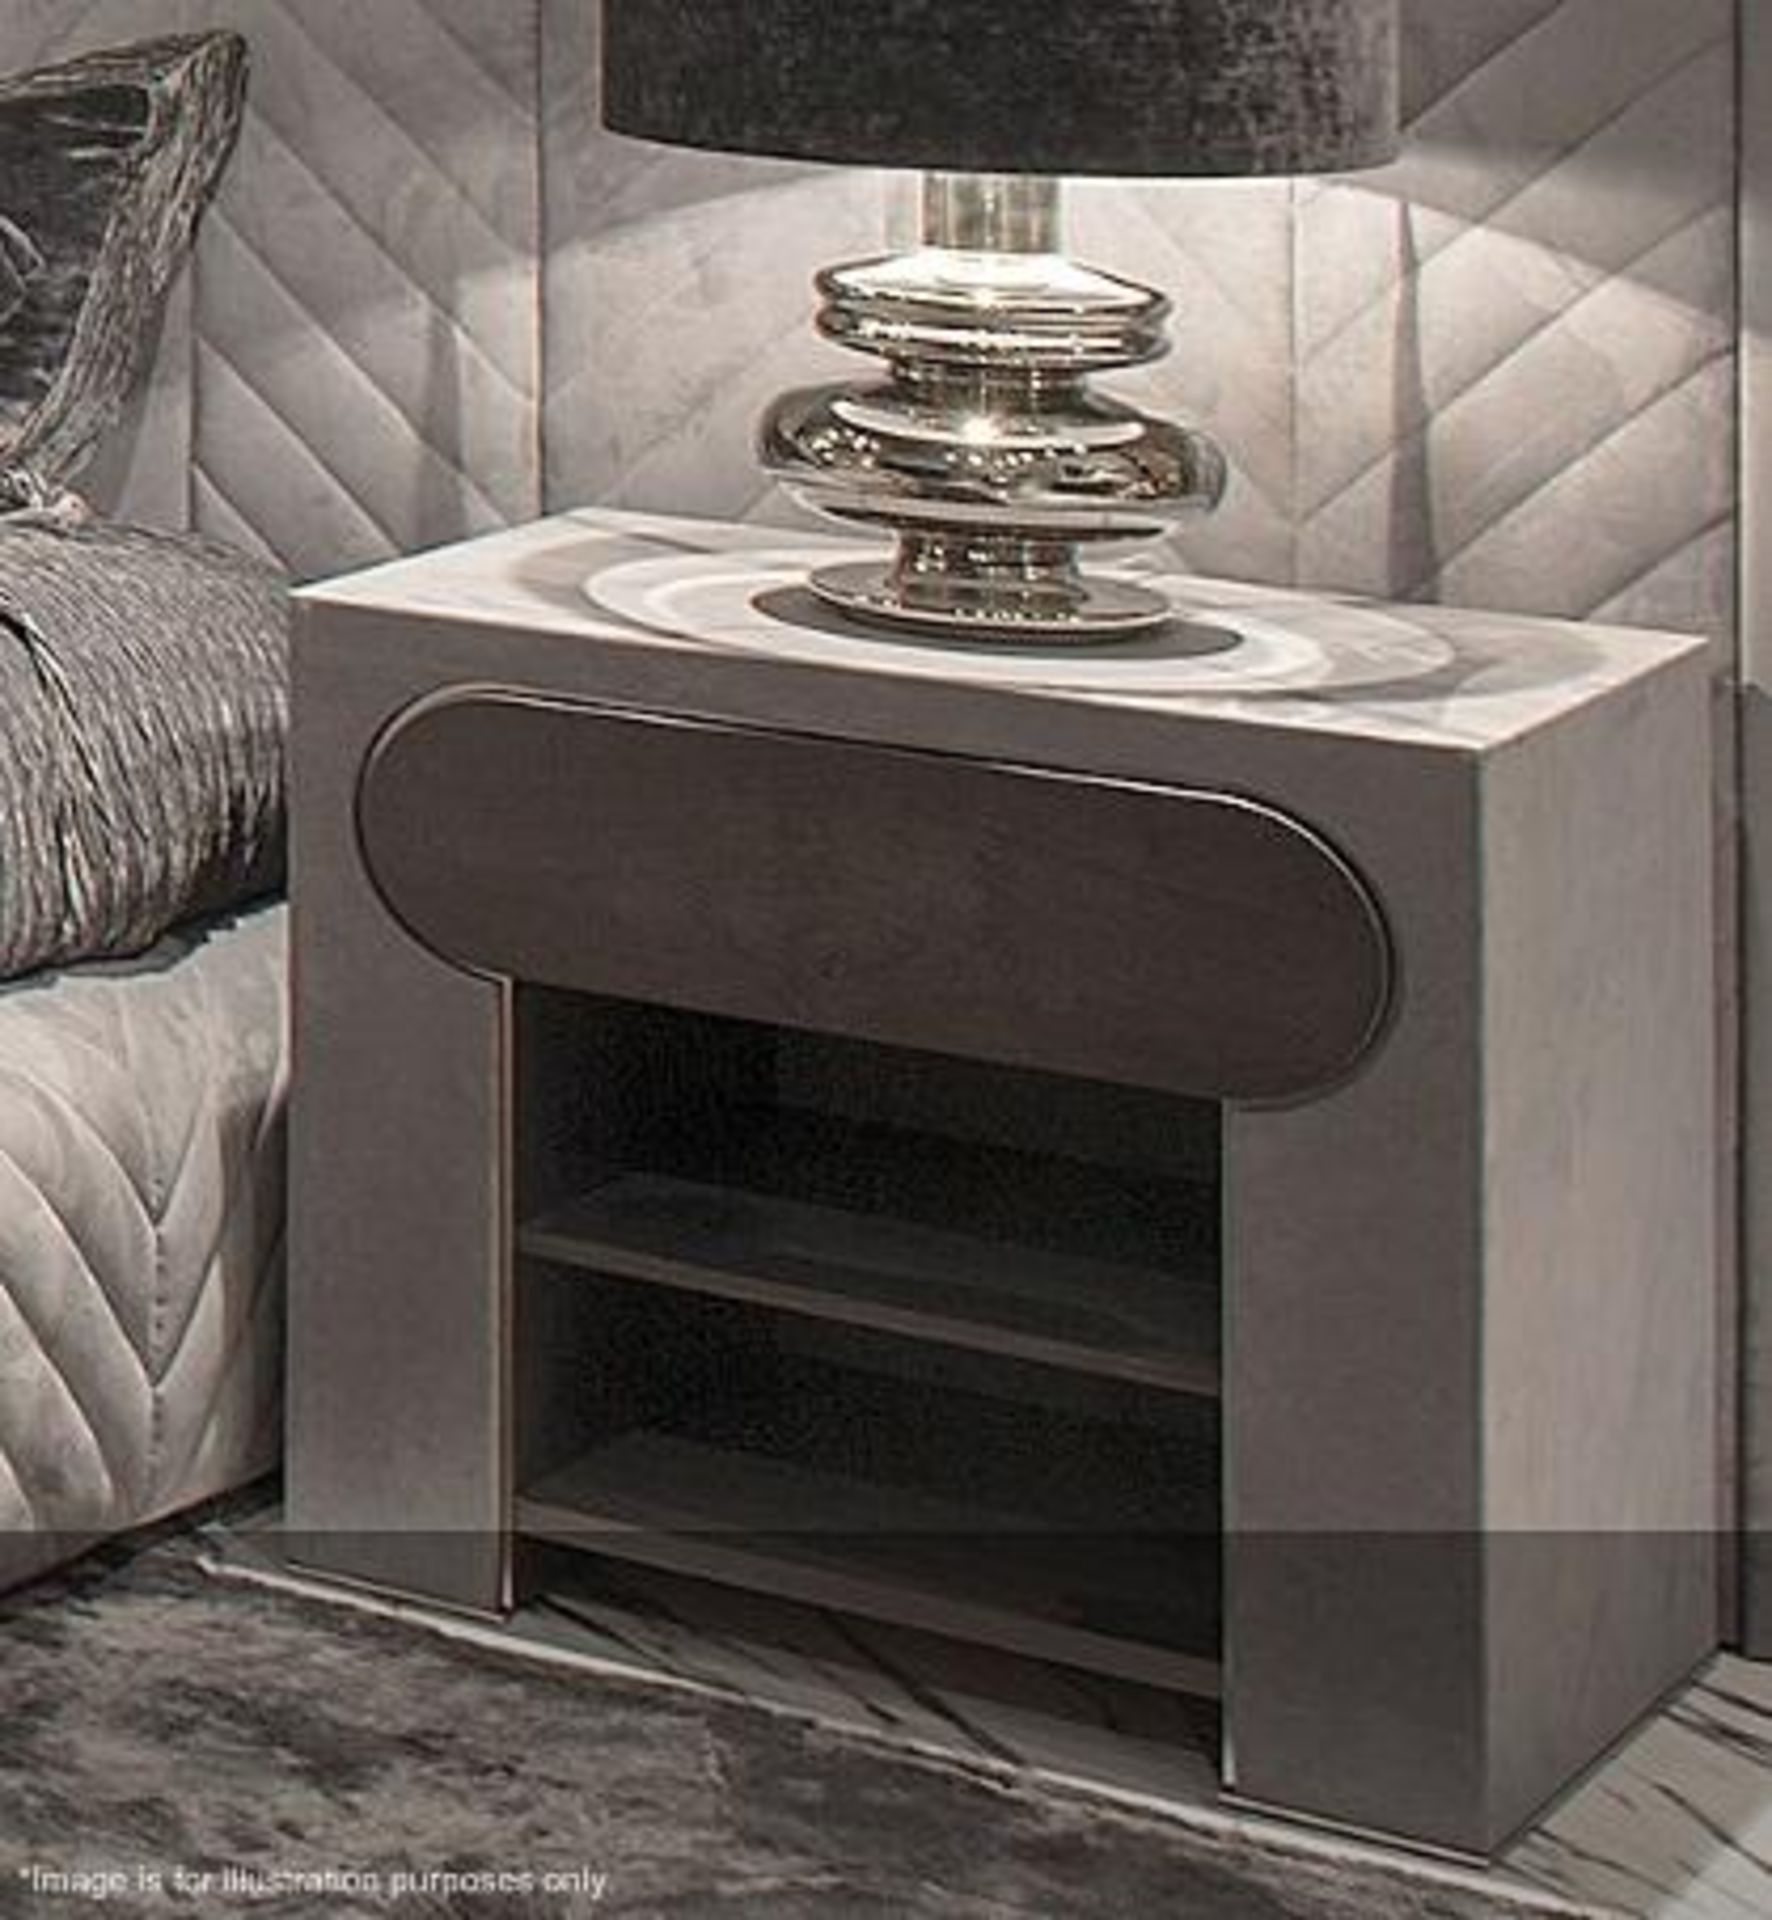 A Pair Of SMANIA 'Lock' Suede Upholstered Nightstand Bedside Cabinets - Dimensions: W71xH66xD50cm